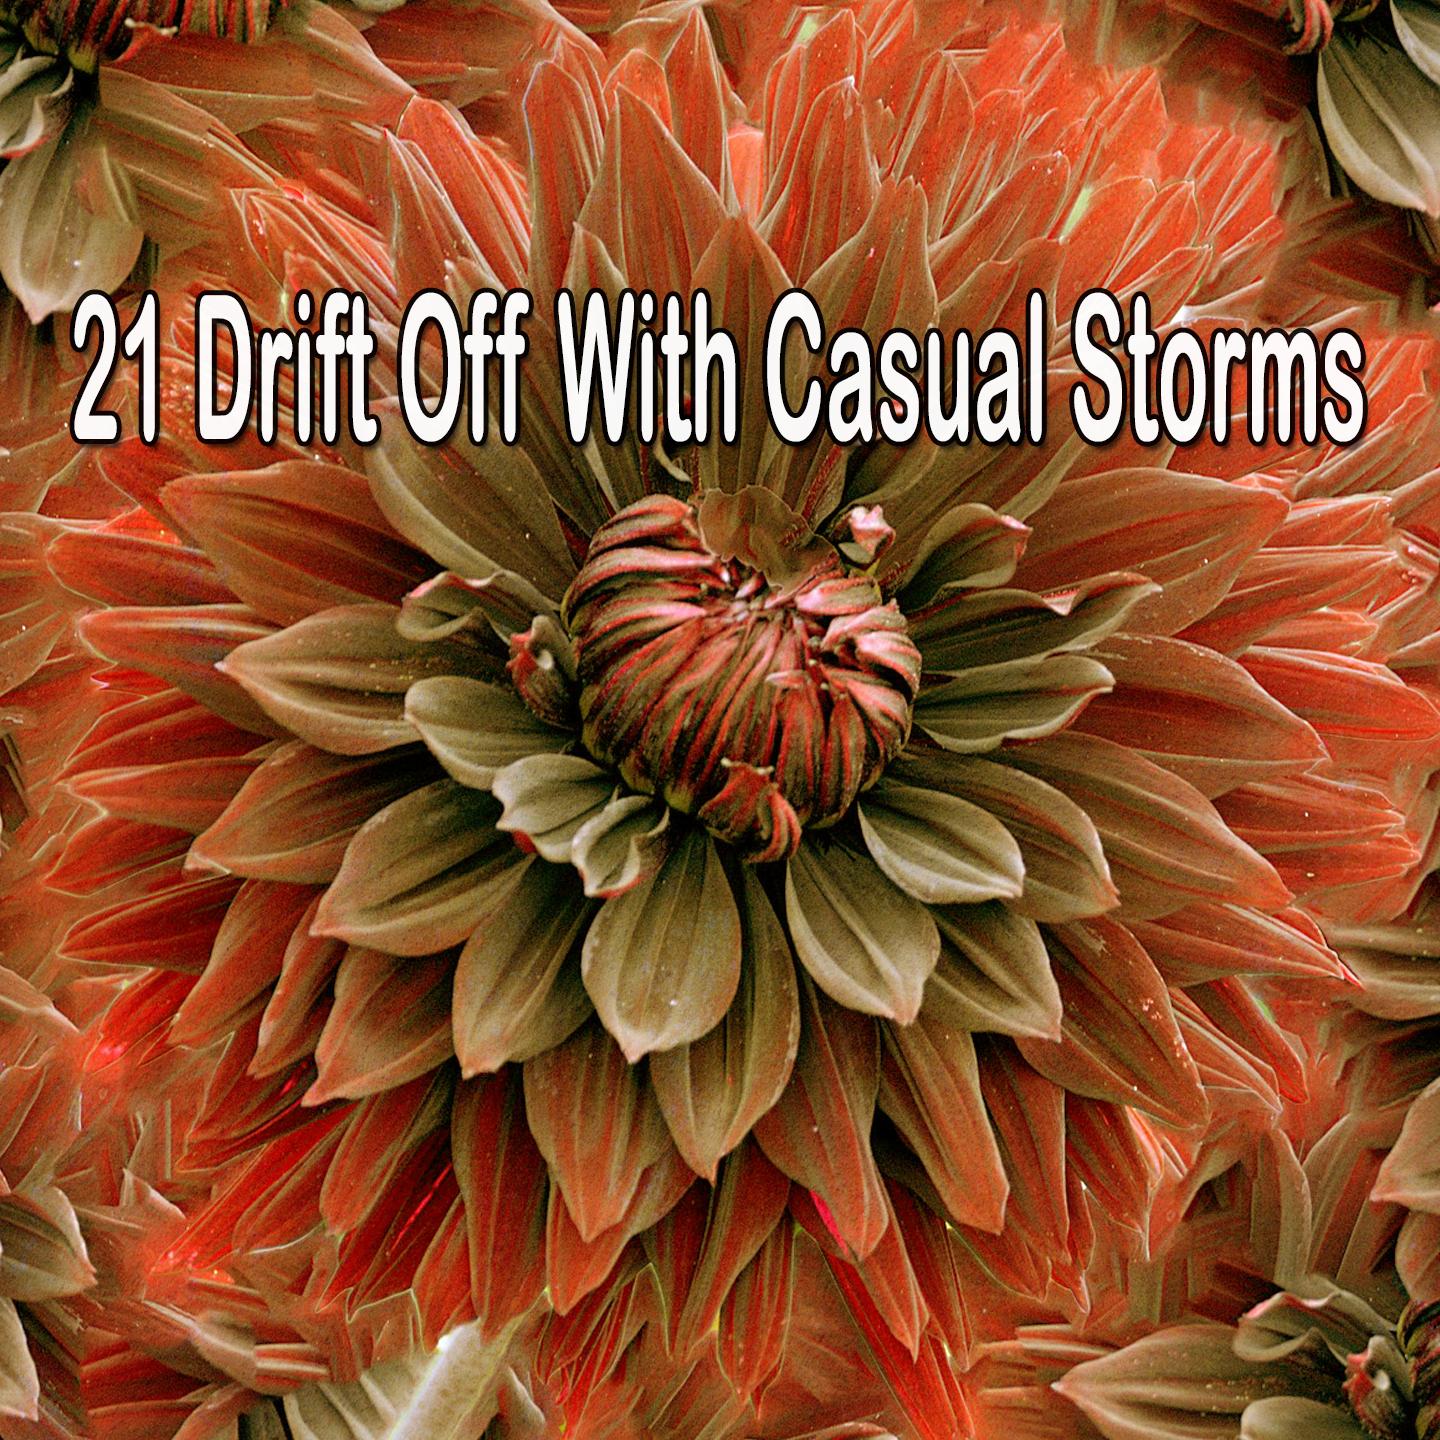 21 Drift Off with Casual Storms